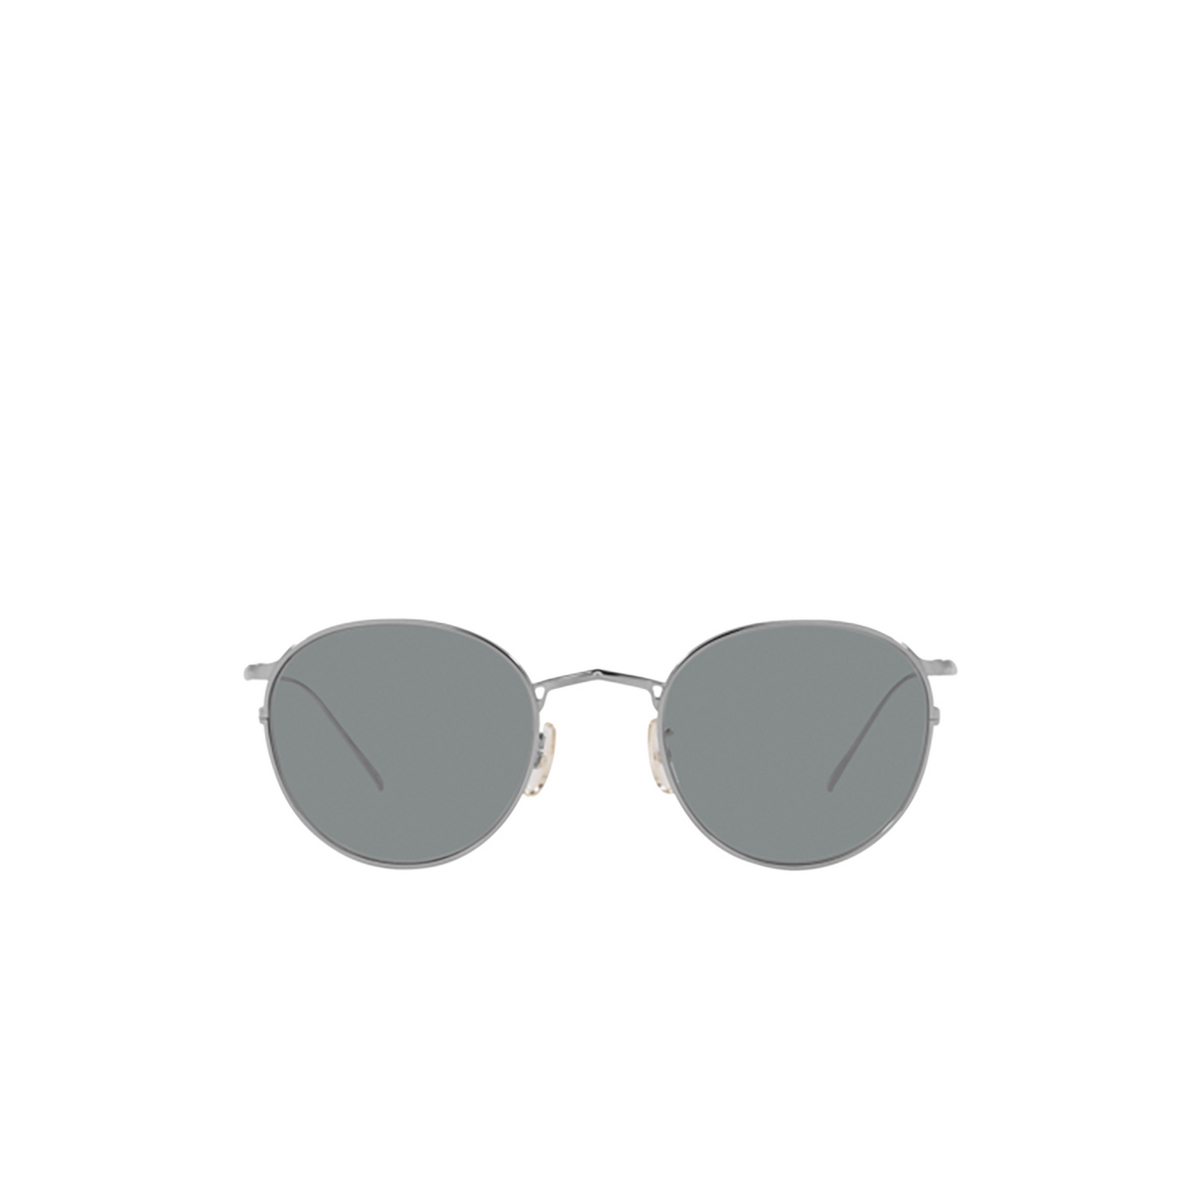 Oliver Peoples G. PONTI-4 Sunglasses 5036R5 Silver - front view